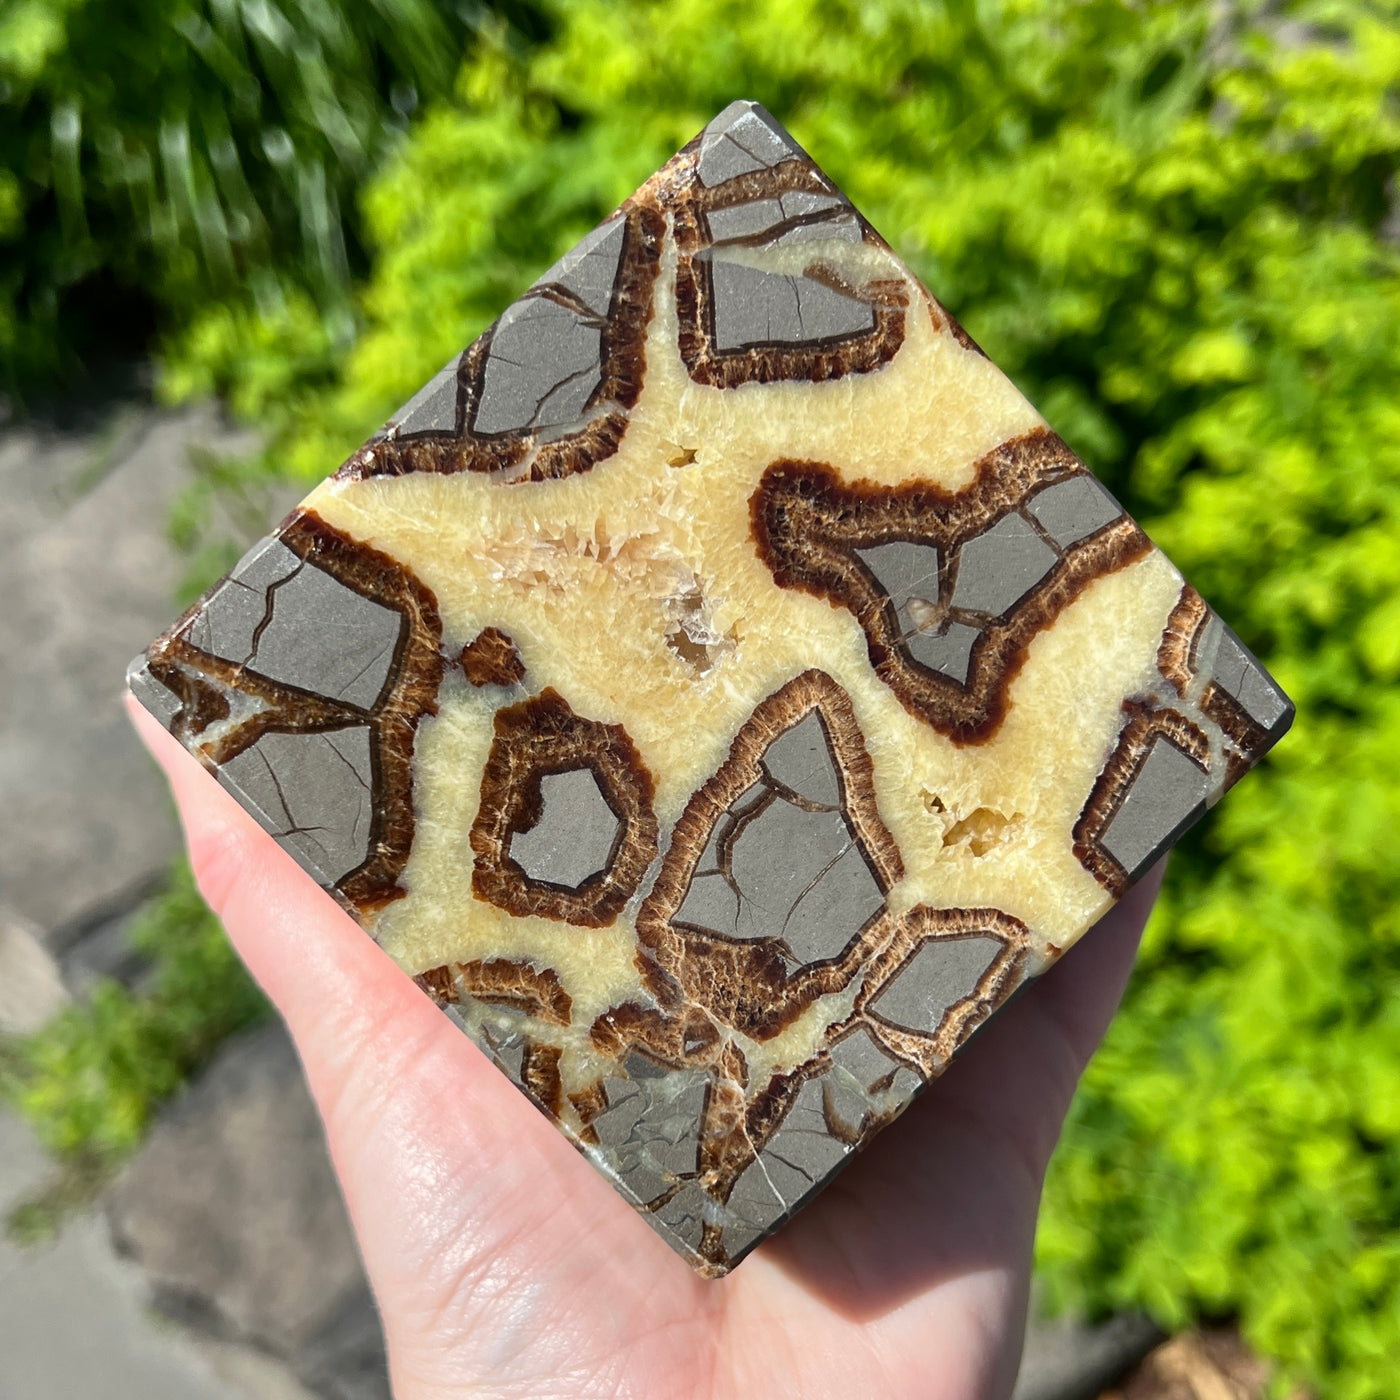 Septarian Large Cube Carving